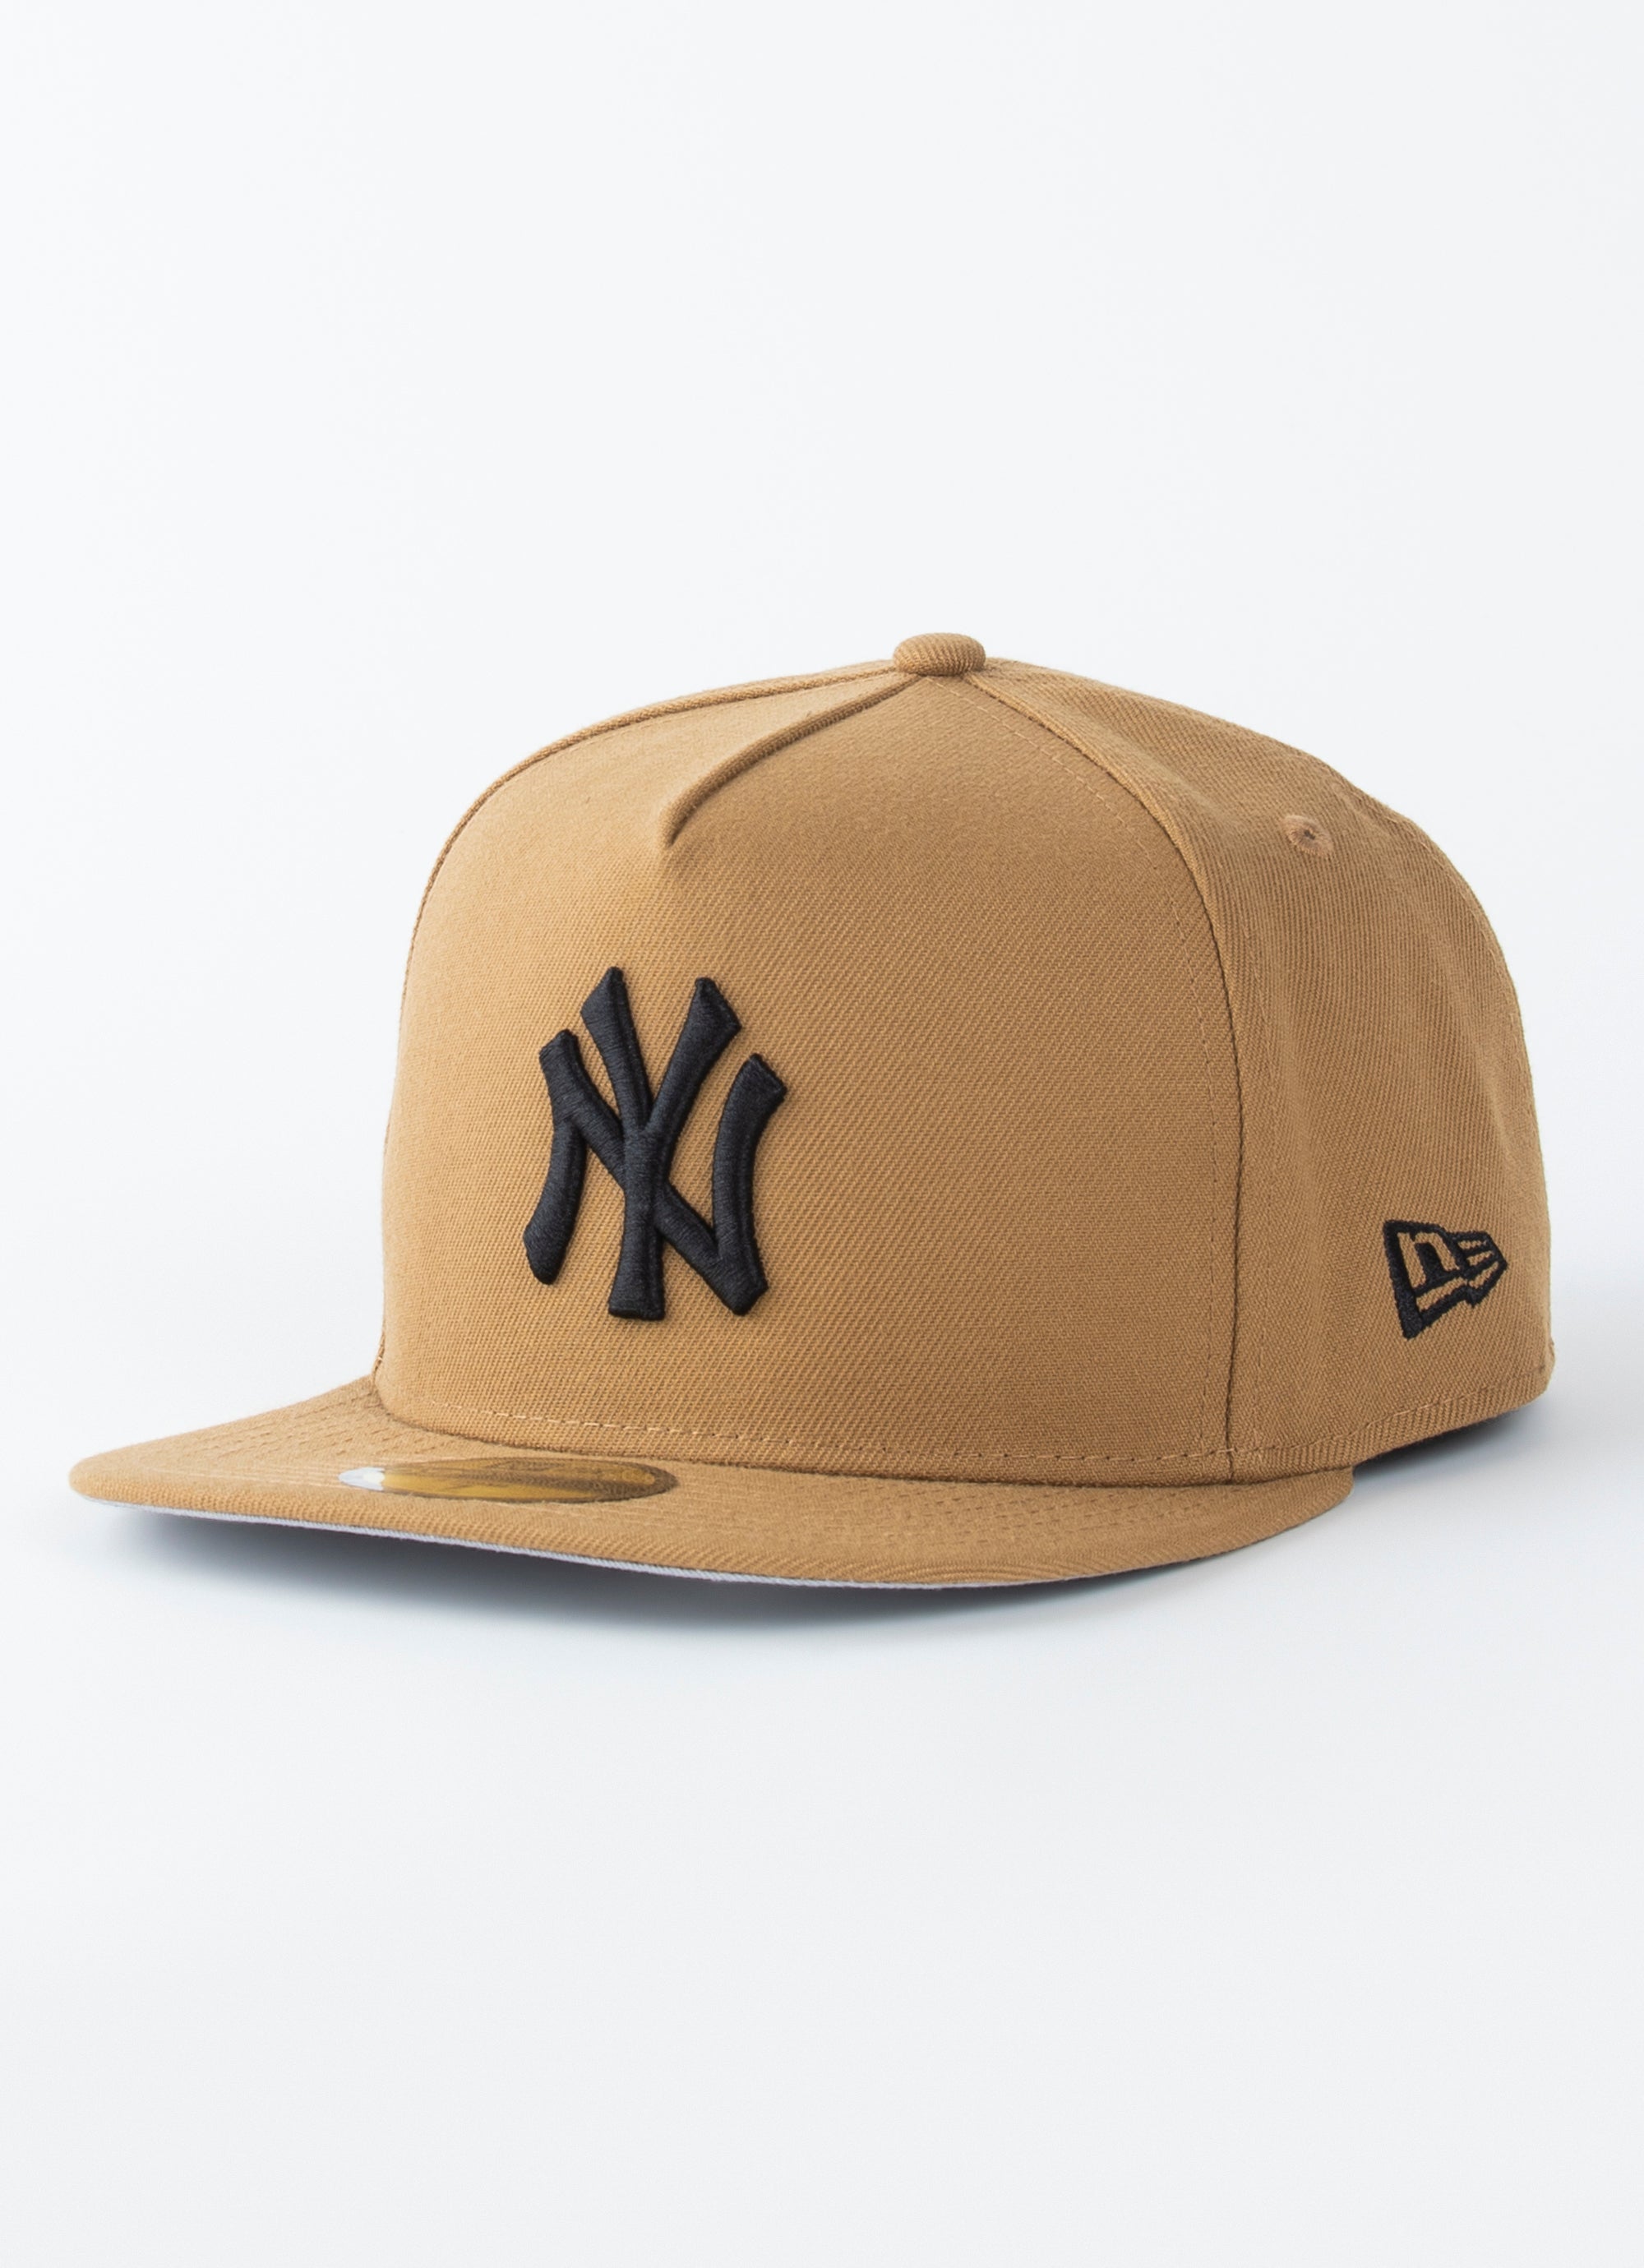 9Fifty MLB White Crown Yankees Cap by New Era  3295 